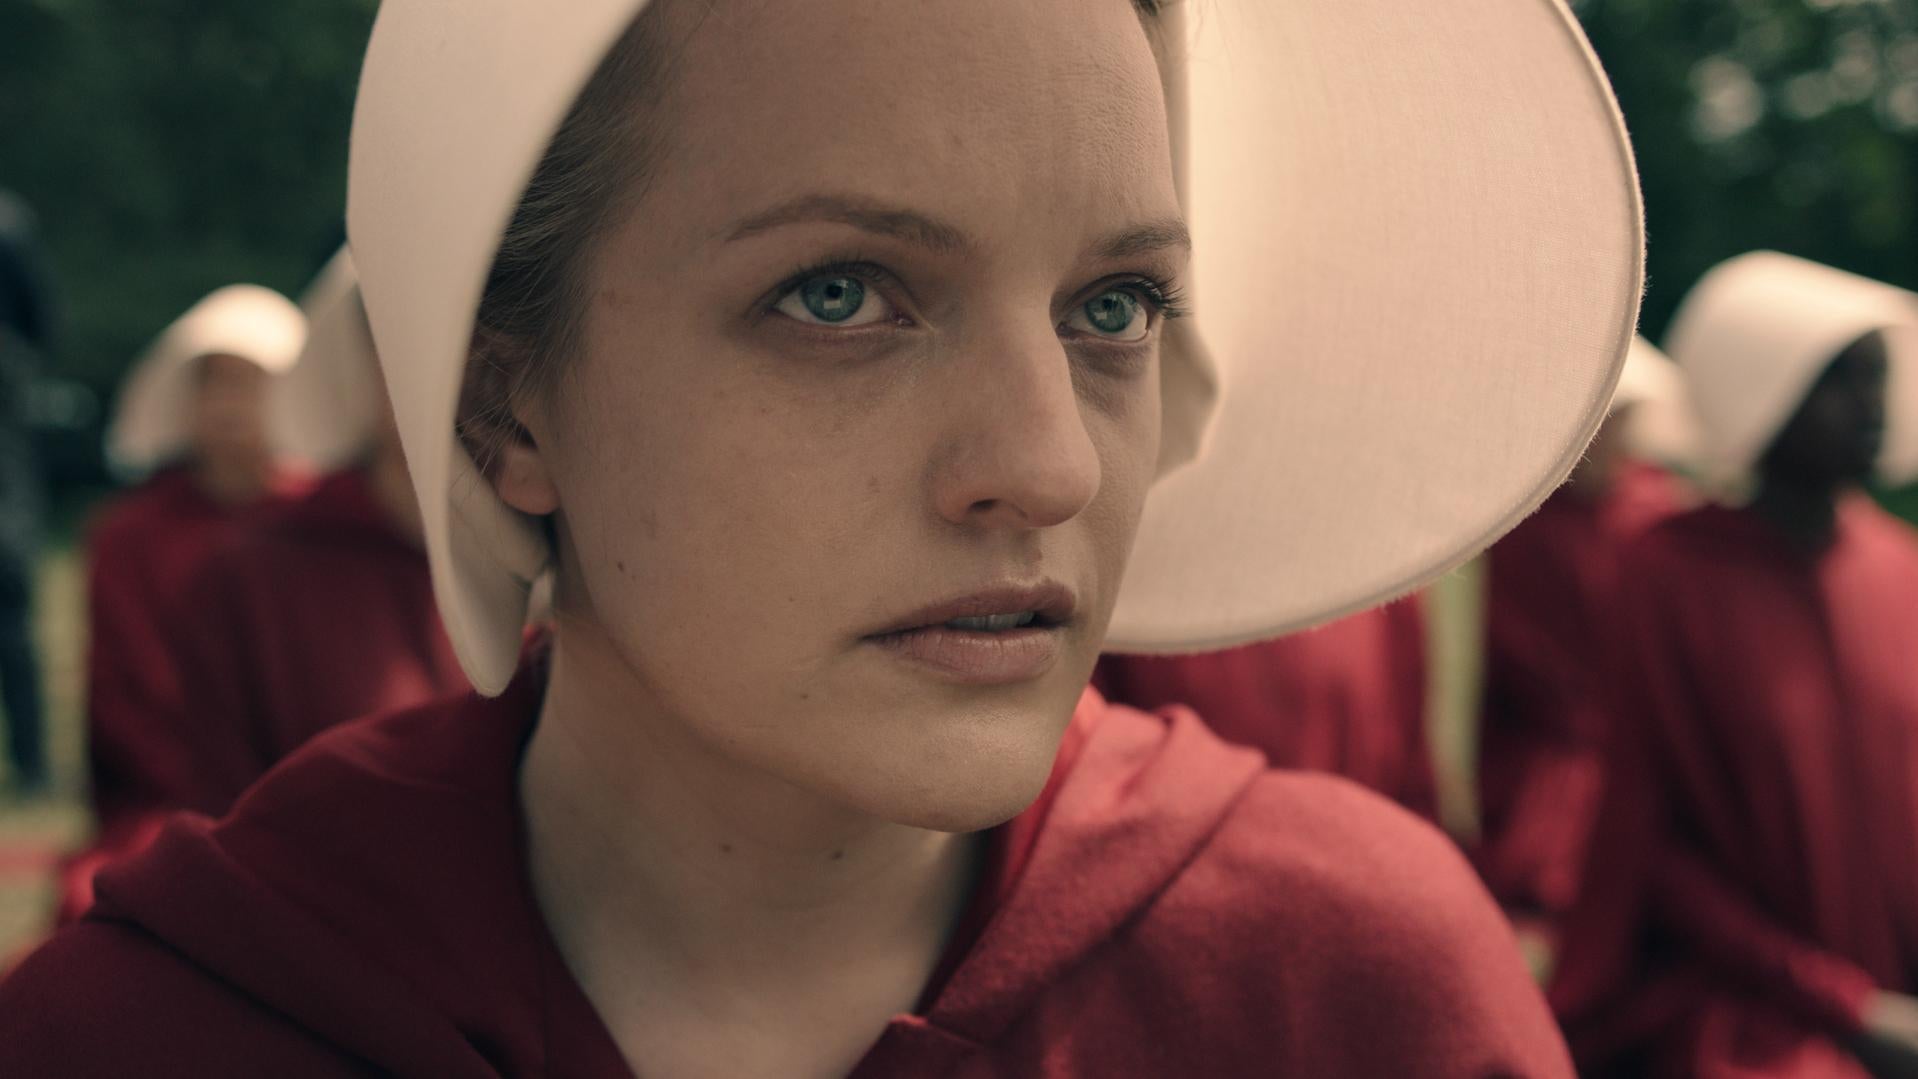 Moss plays Offred in 'The Handmaid's Tale' who is shipped off to be trained as a breeder to help infertile couples